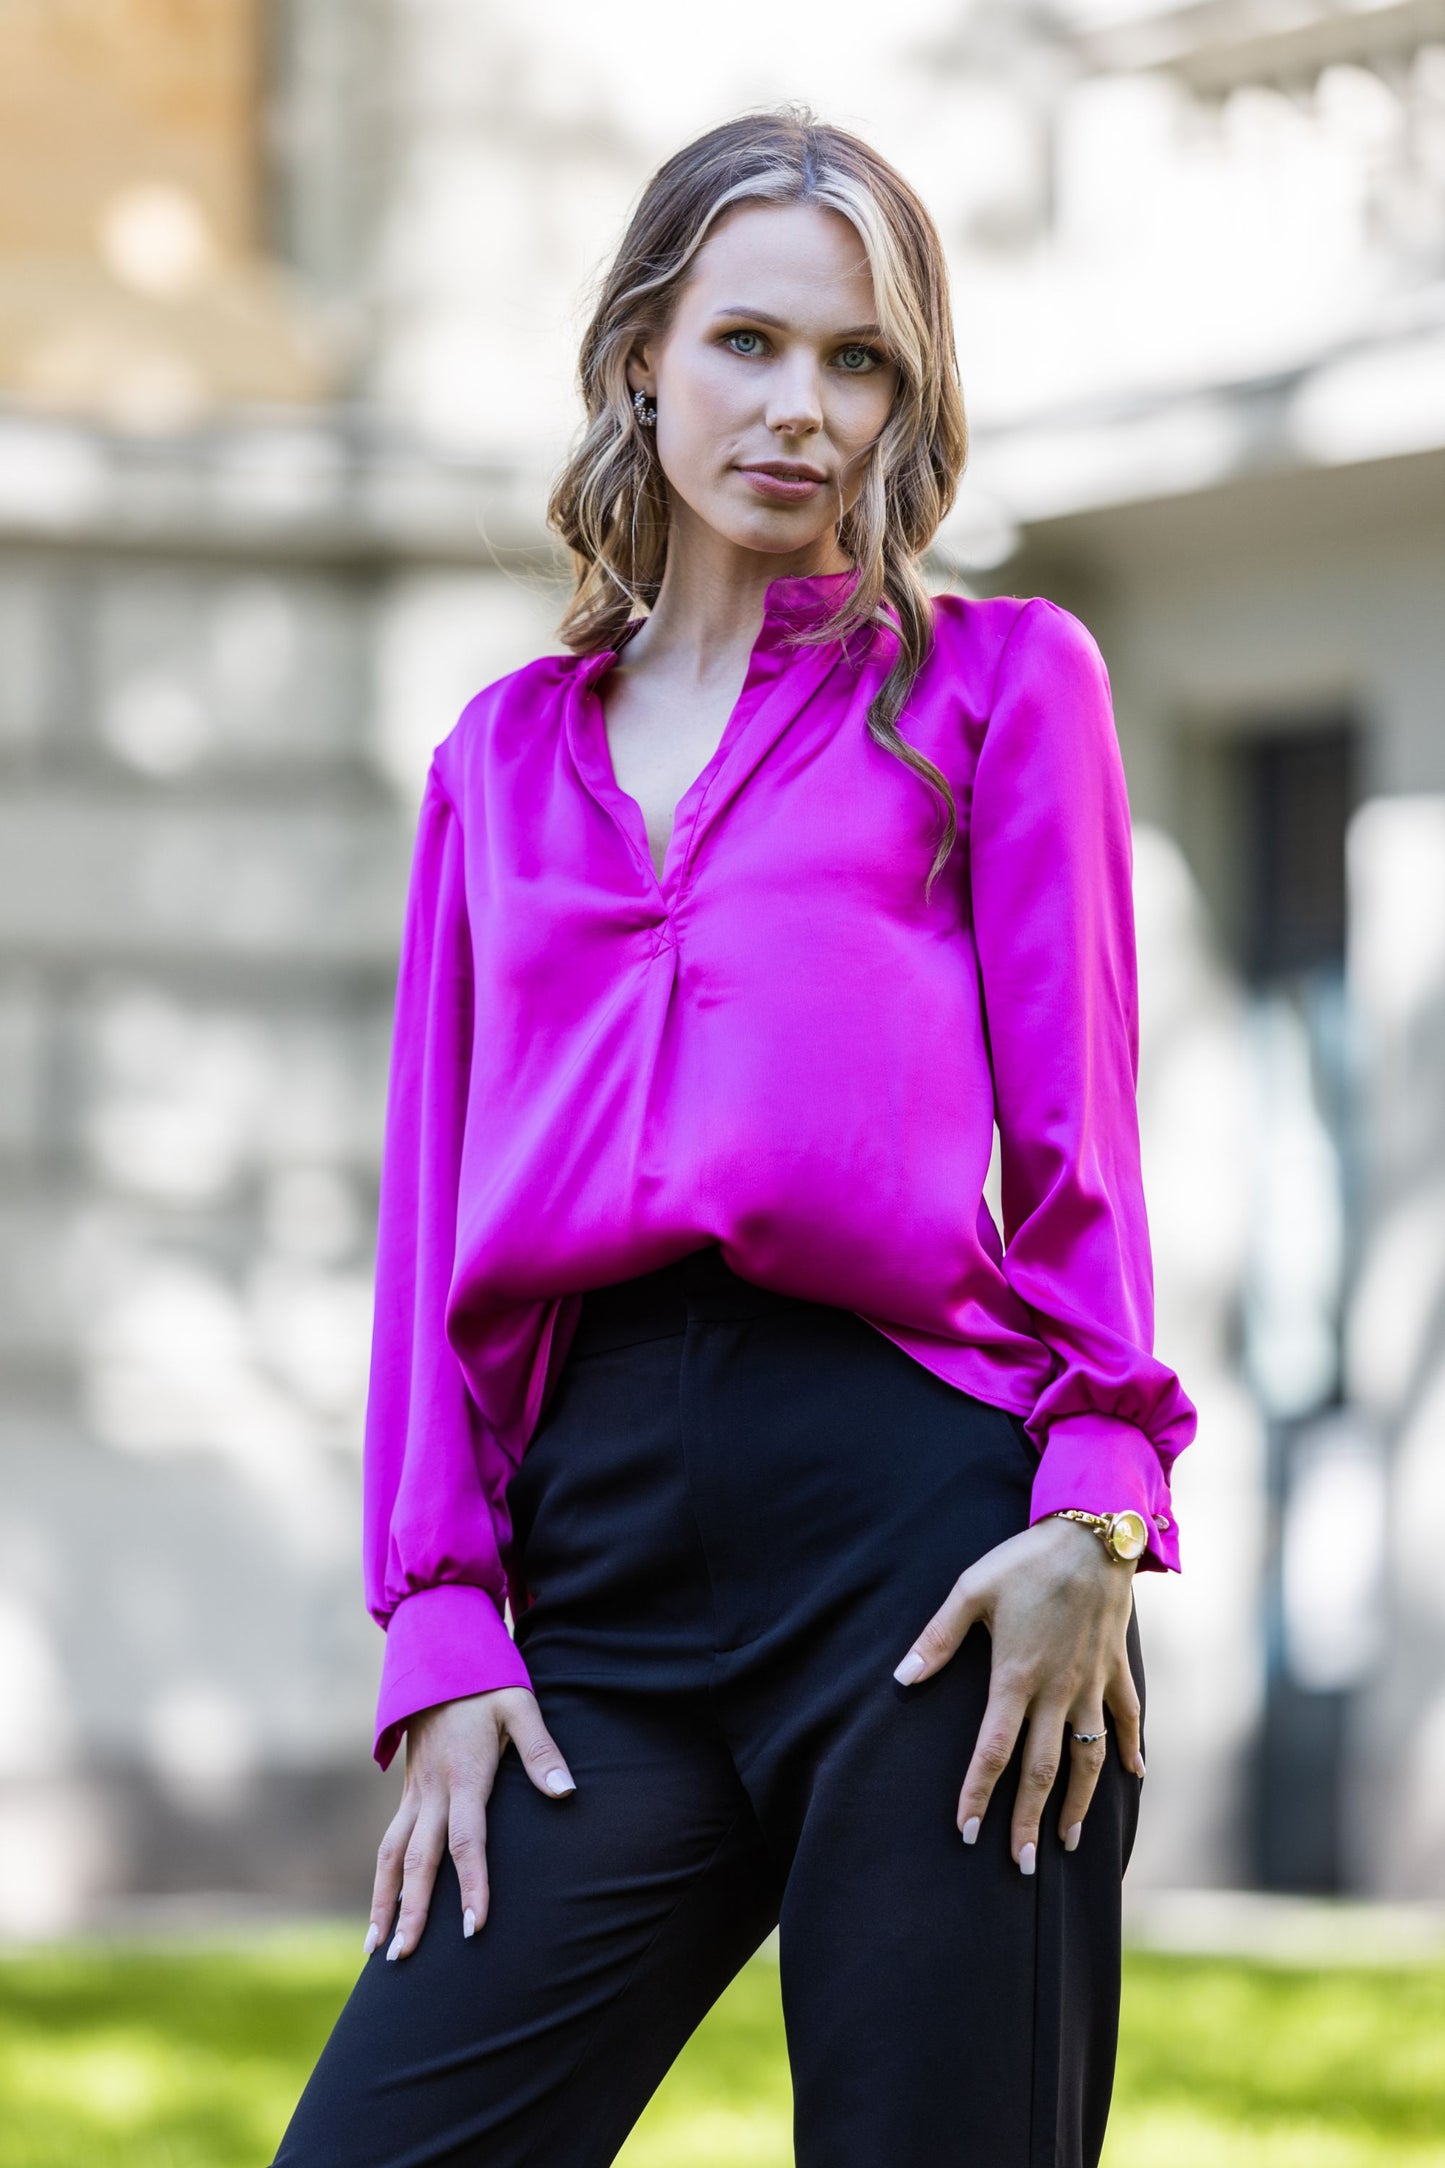 Fuchsia pink satin blouse with V cut